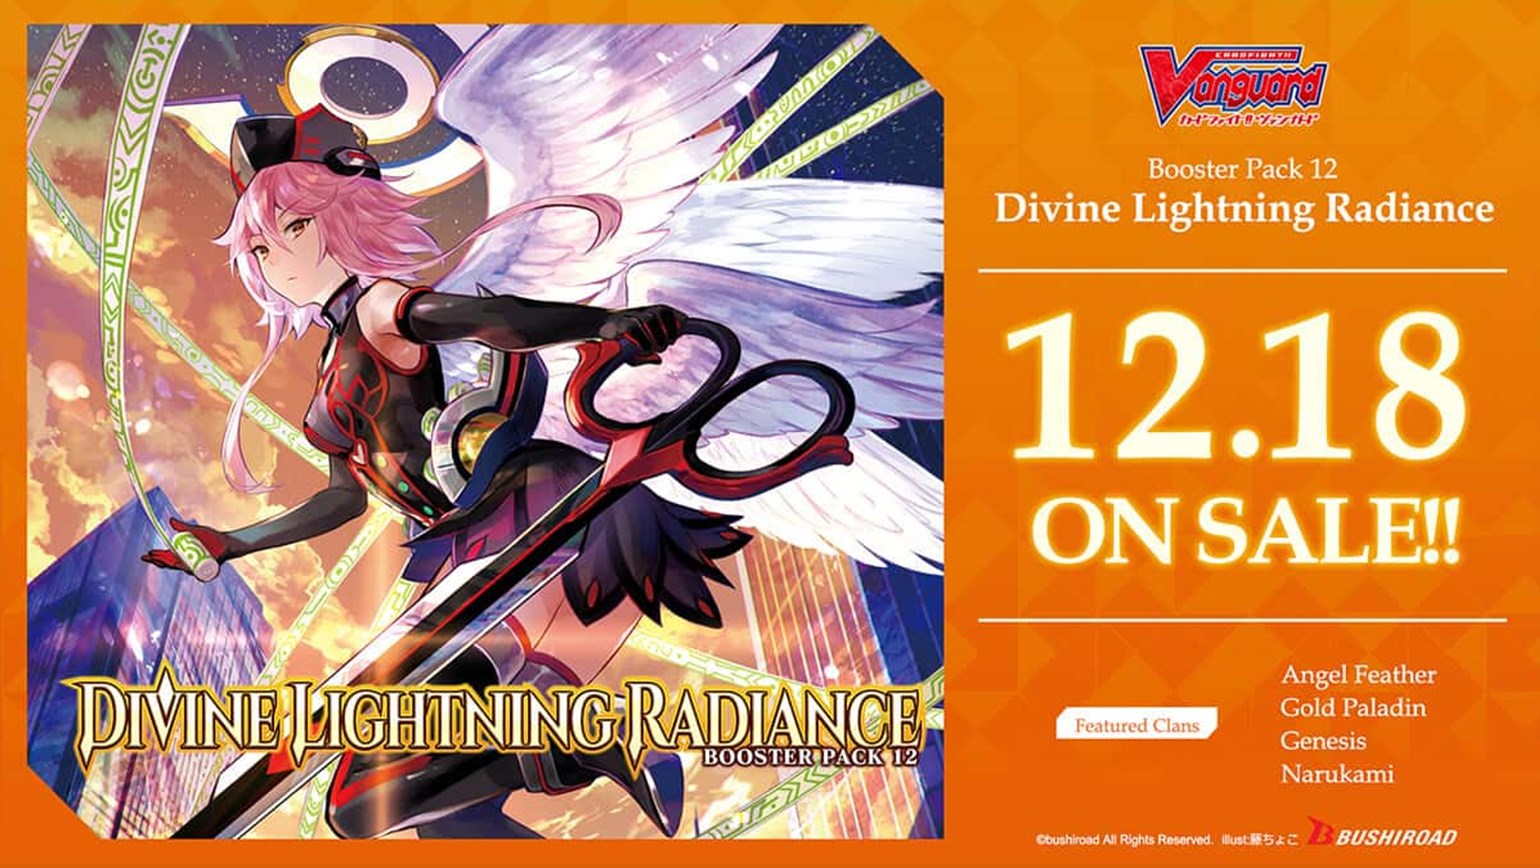 New English Edition Booster Pack Vol. 12: Divine Lightning Radiance is Coming to Stores on December 18th!